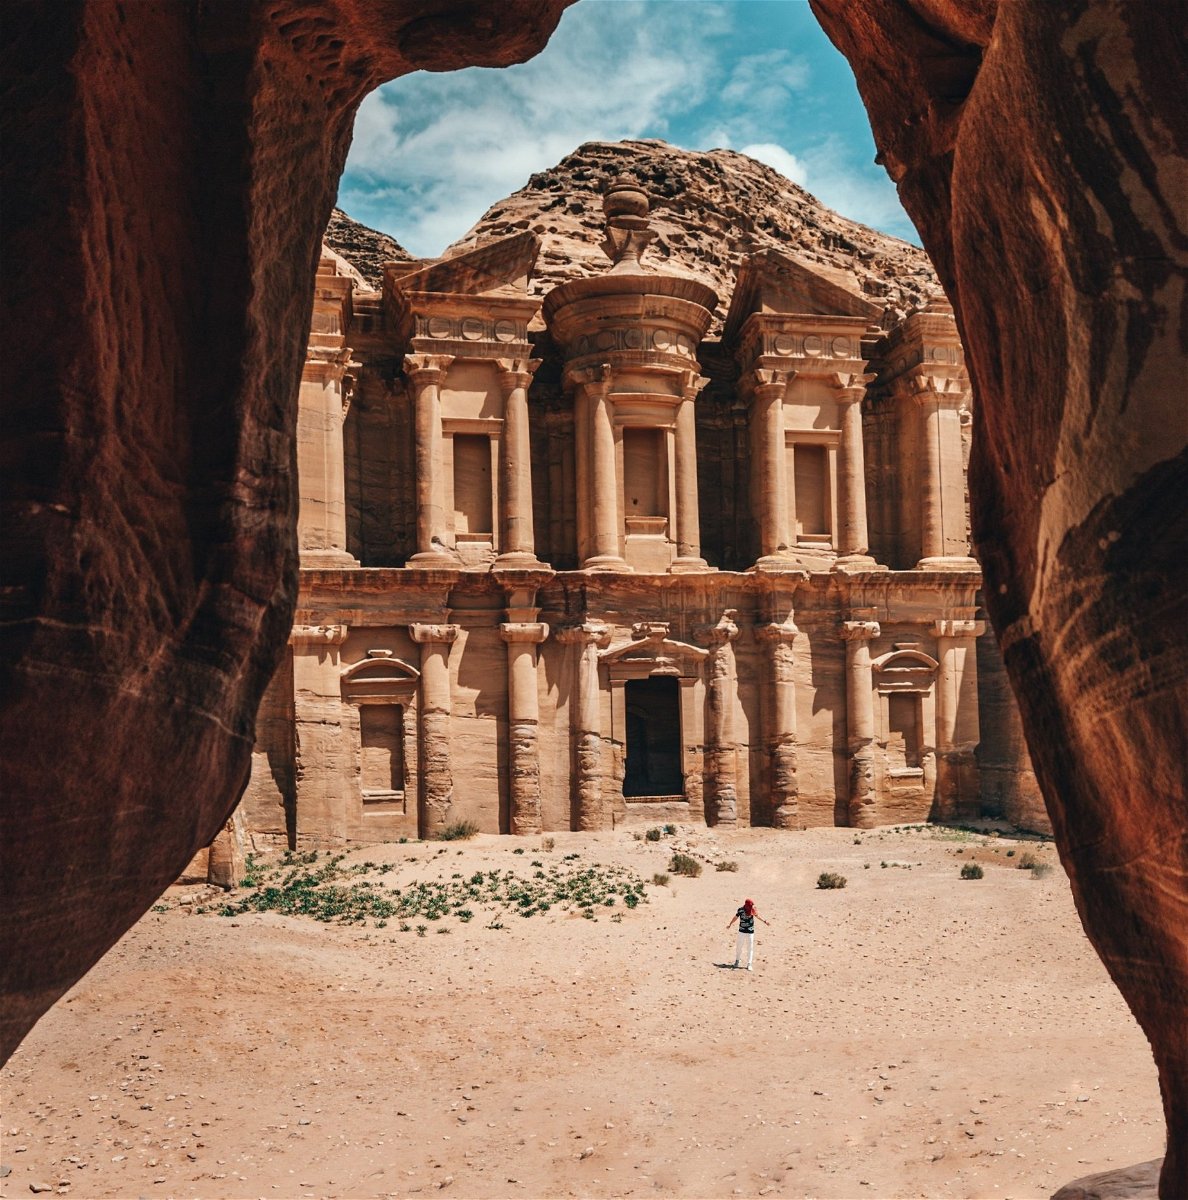 View of The Treasury in Petra